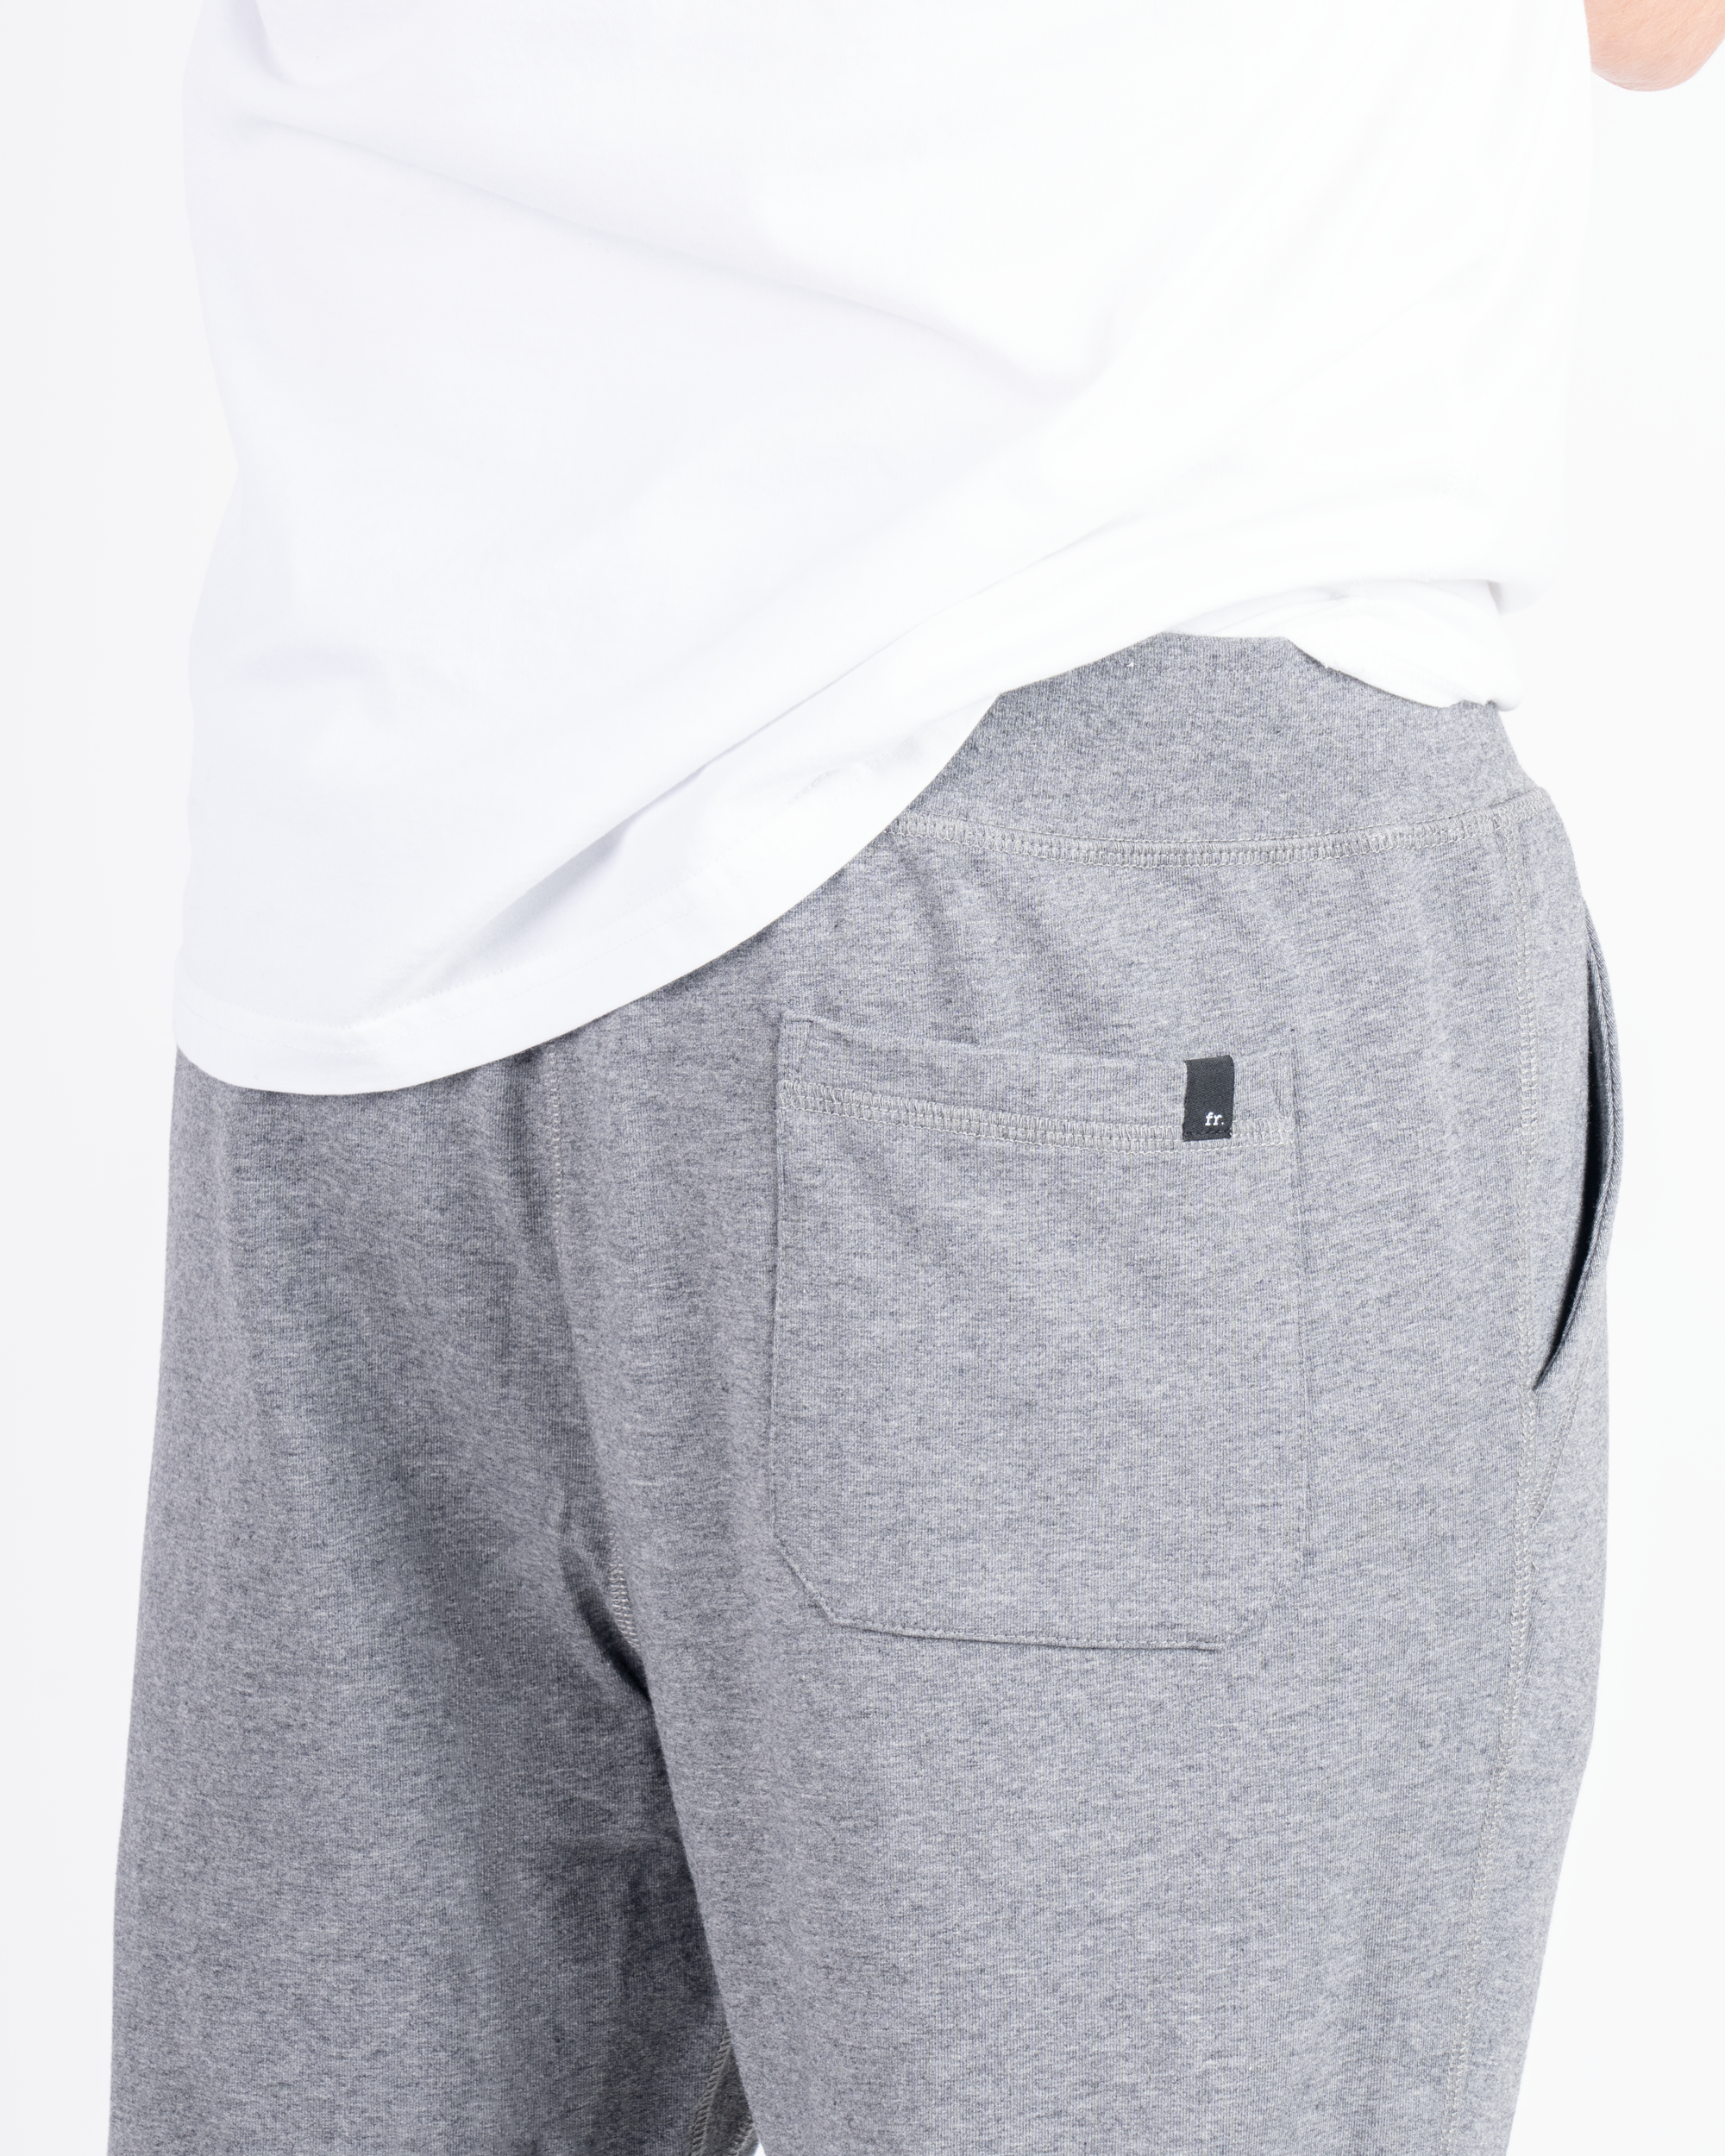 Foreign Rider Co Technical Fabric Grey Jogger Back Pocket Detail